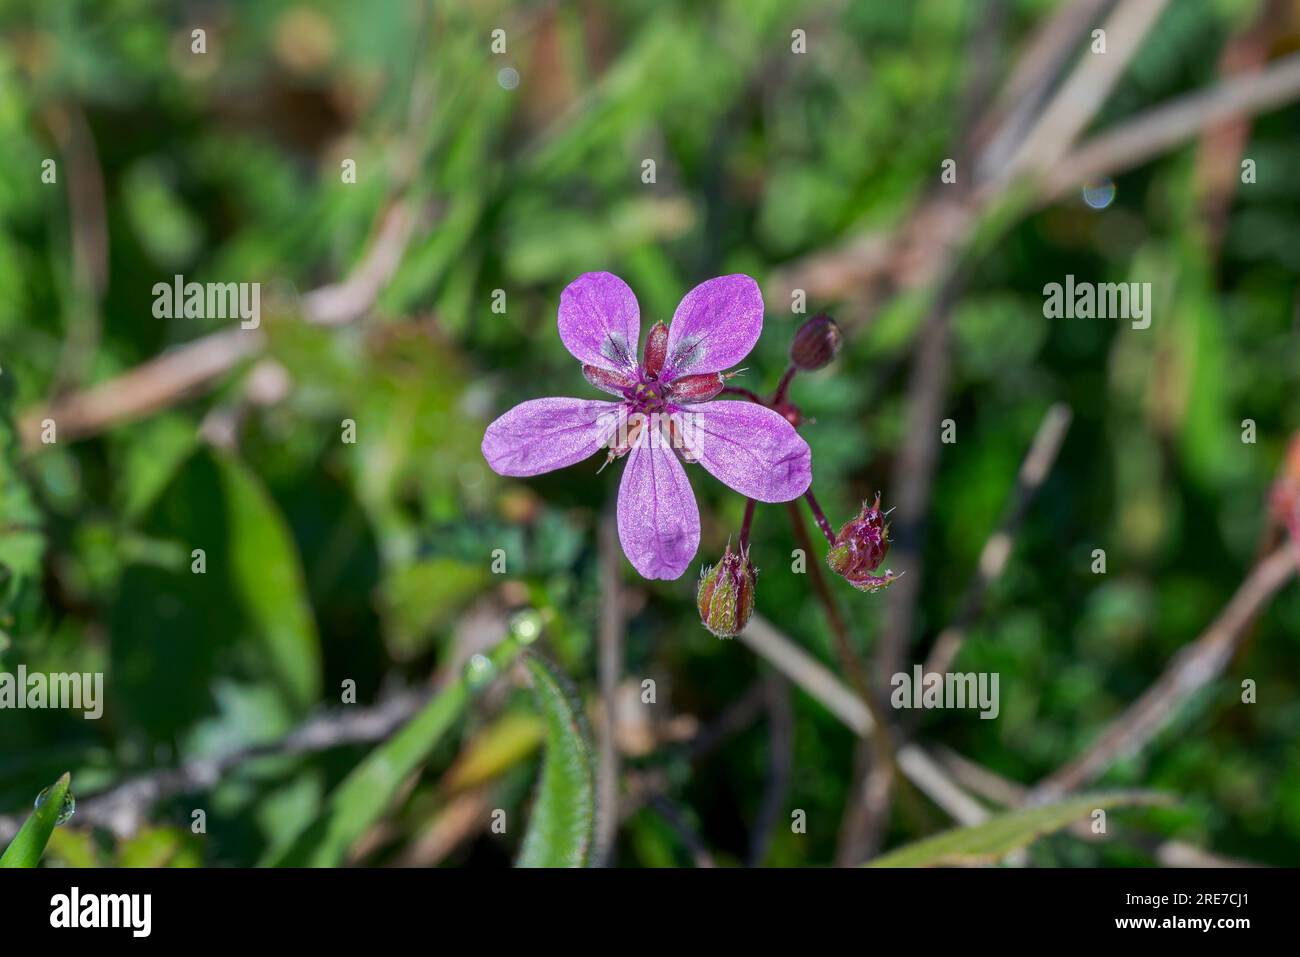 Common stork’s bill, Erodium cicutarium. It is an herbaceous annual member of the family Geraniaceae of flowering plants. Photo taken in Colmenar Viej Stock Photo